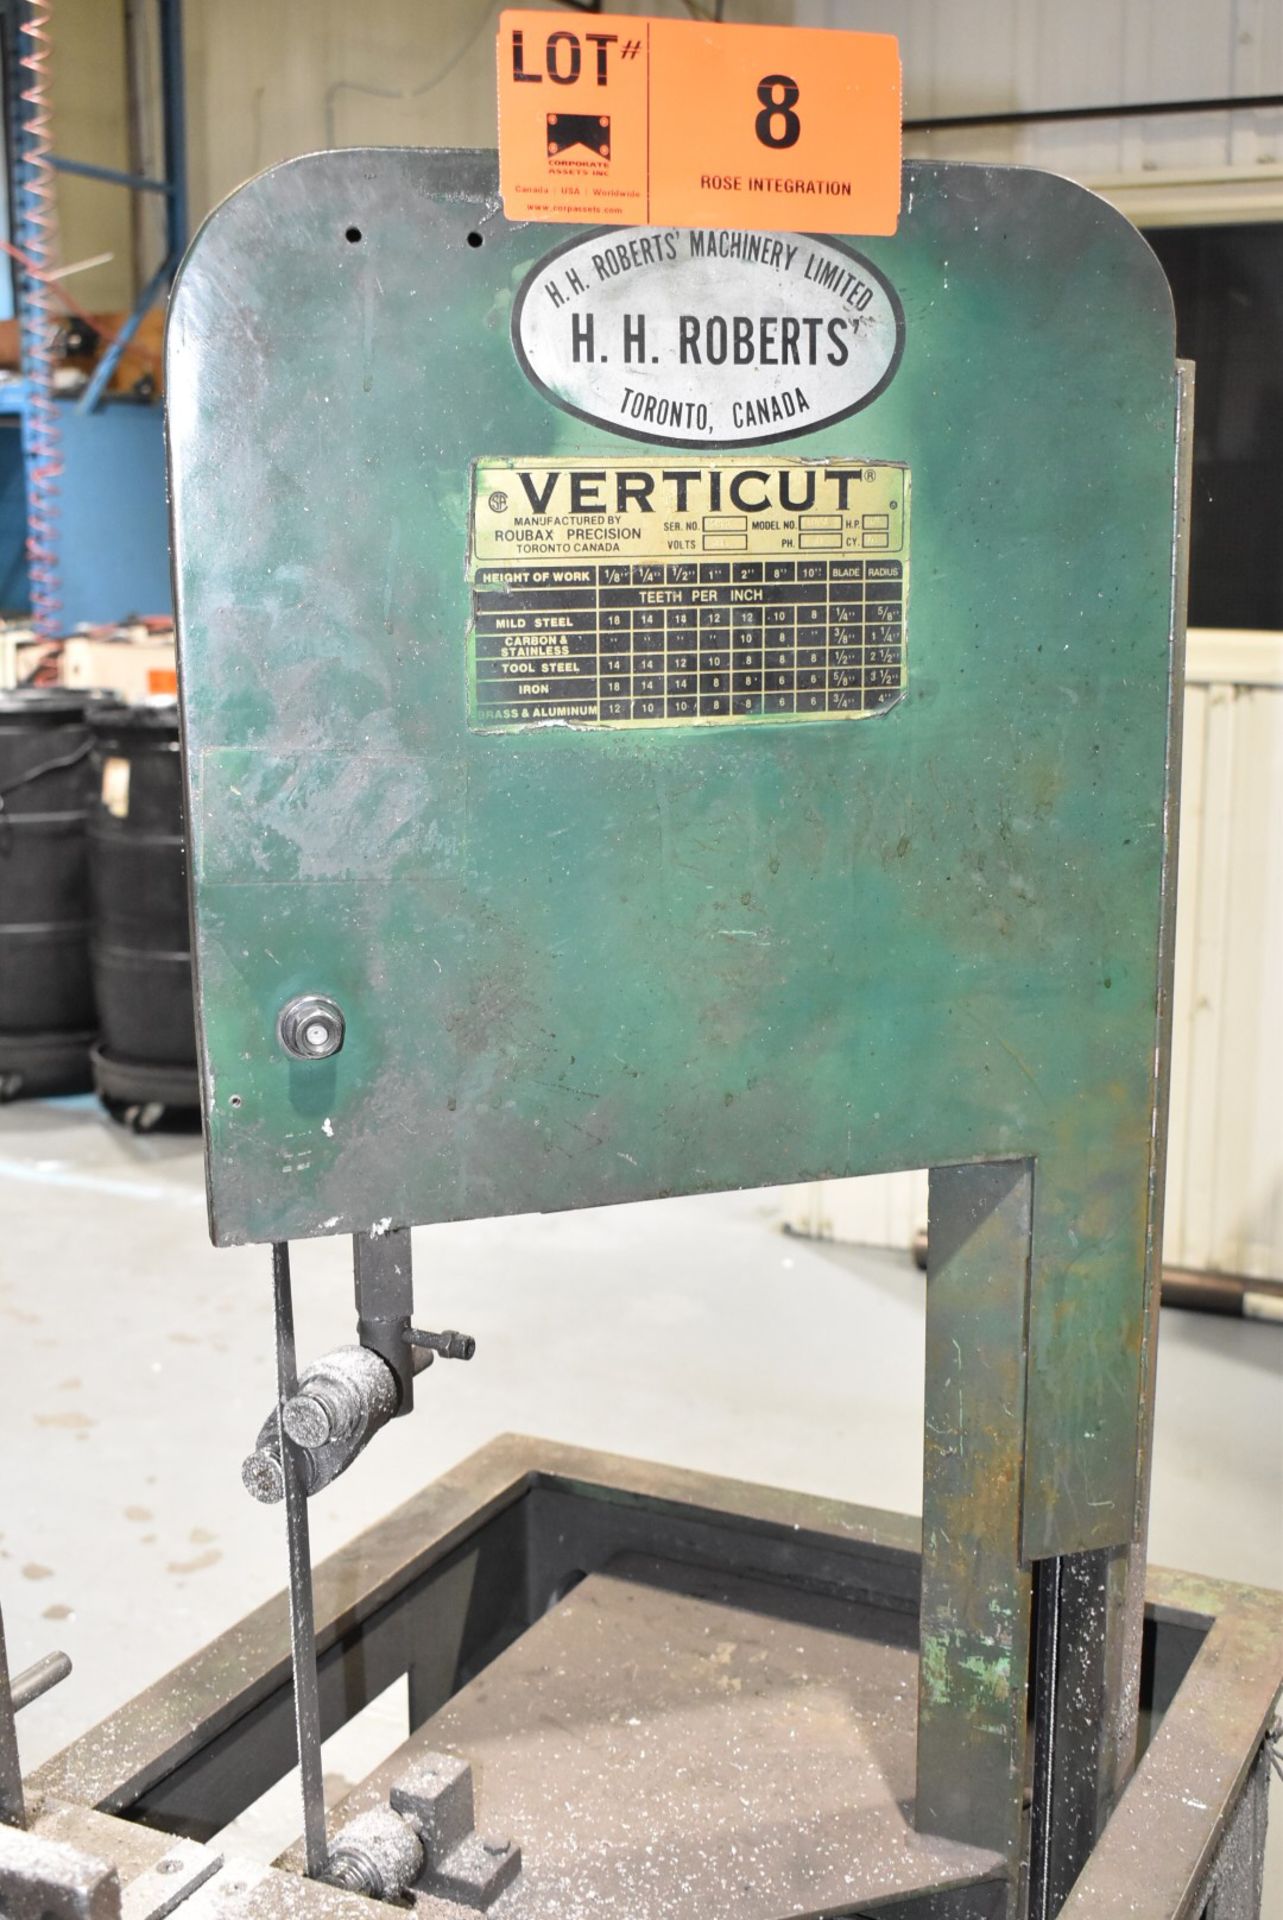 VERTICUT 114-A VERTICAL BANDSAW WITH 18.5" X 30.25" TABLE, 3/4 HP MOTOR, 115V/1PH/60HZ, S/N 1556 ( - Image 2 of 4